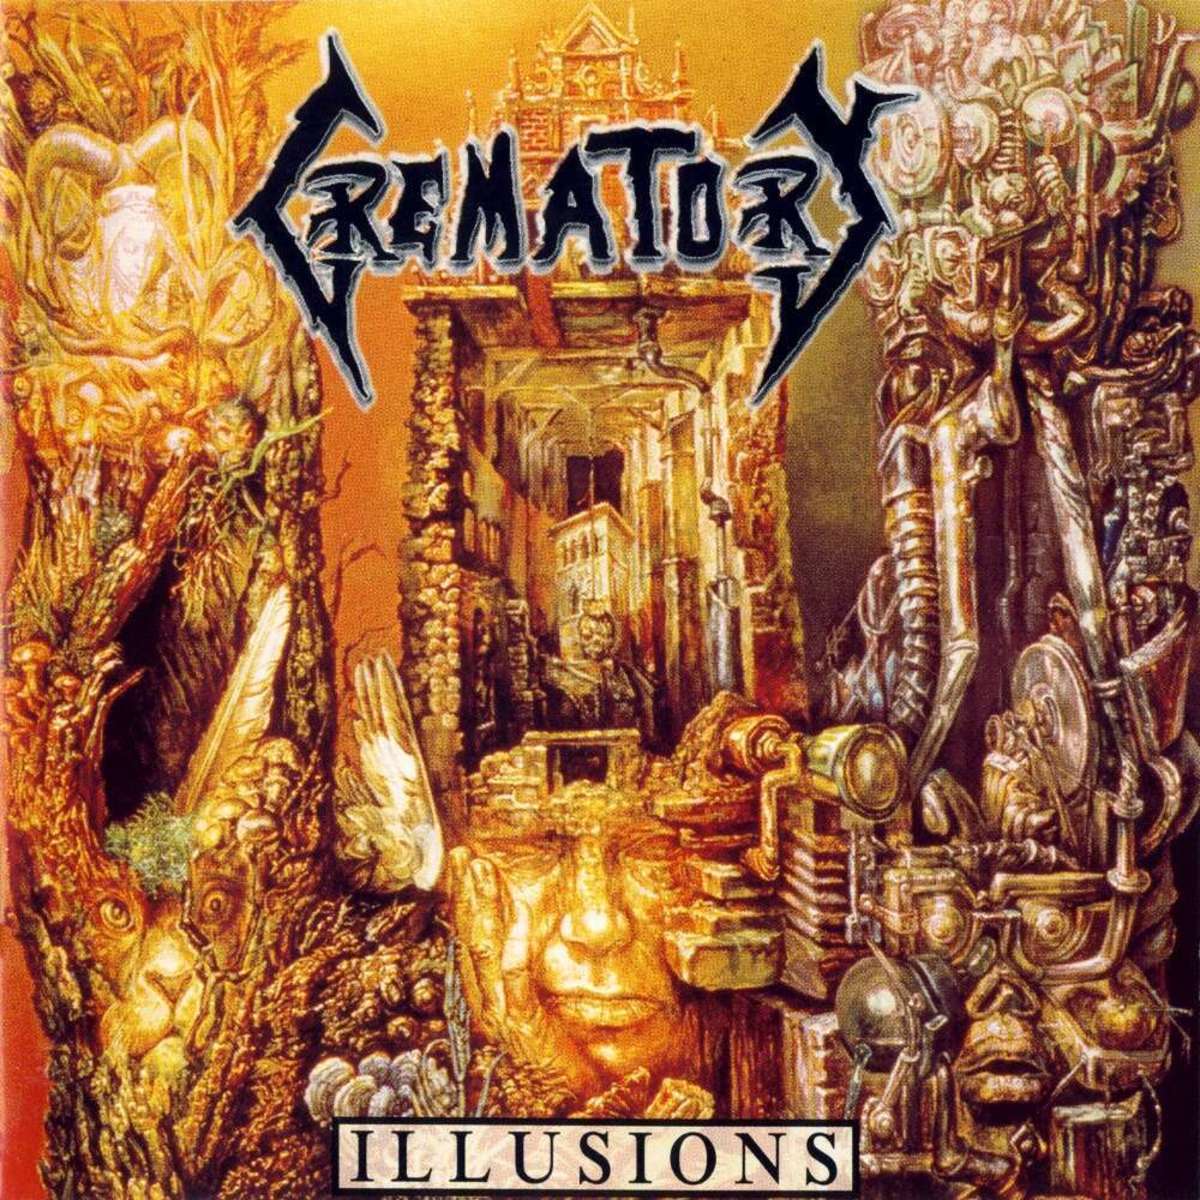 review-of-the-album-illusions-by-crematory-a-german-gothic-metal-band